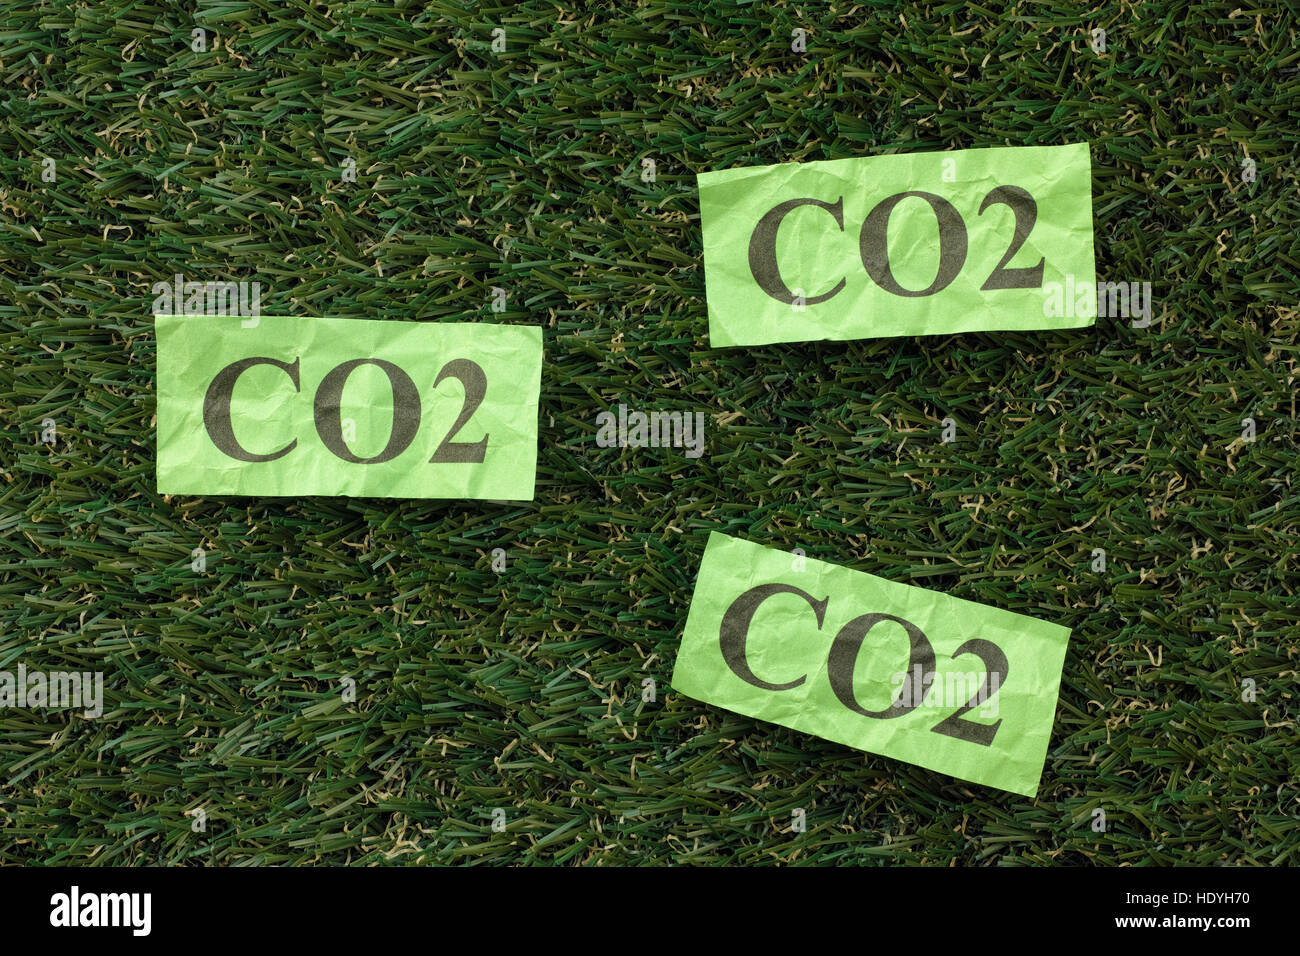 Carbon Dioxide Cloud (CO2) on a green grass. Concept image. Close up. Stock Photo